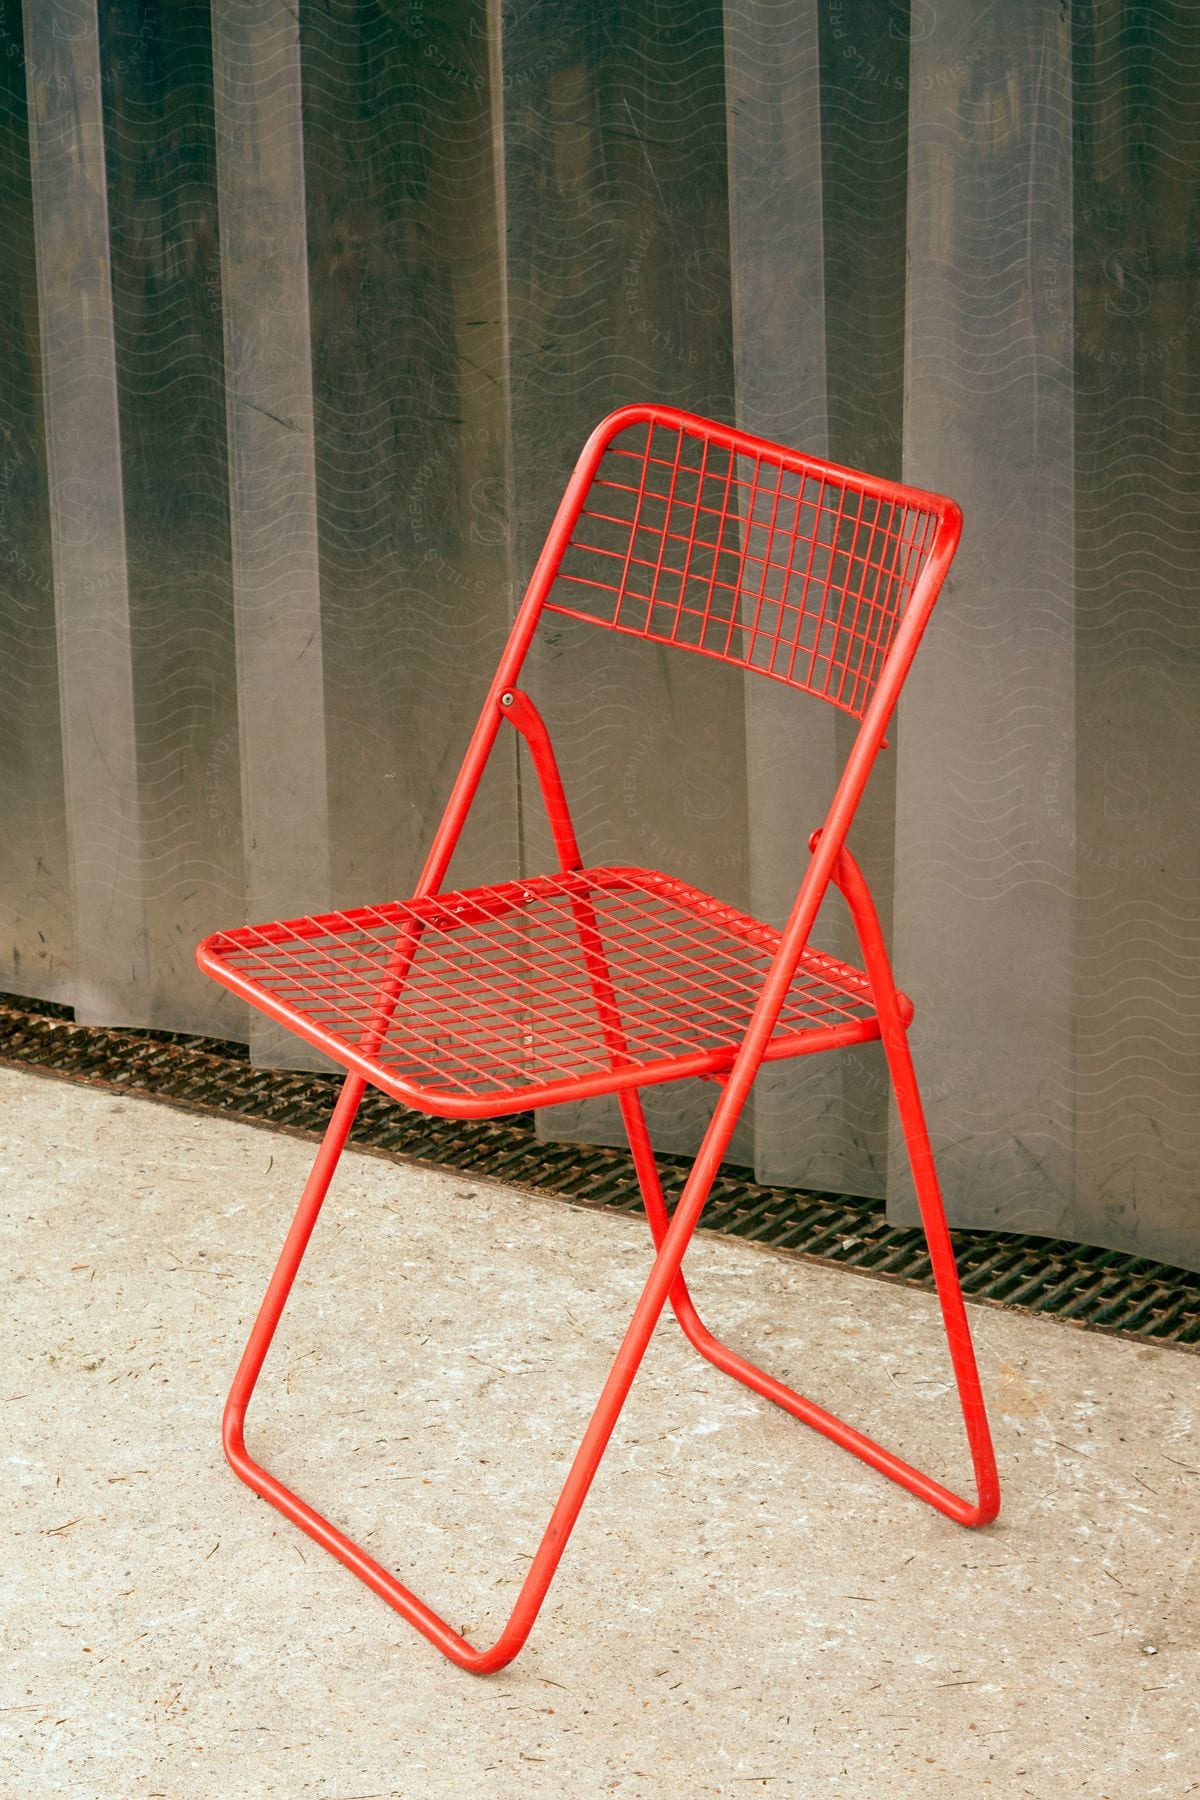 A red chair is placed on the floor near a room divider wall